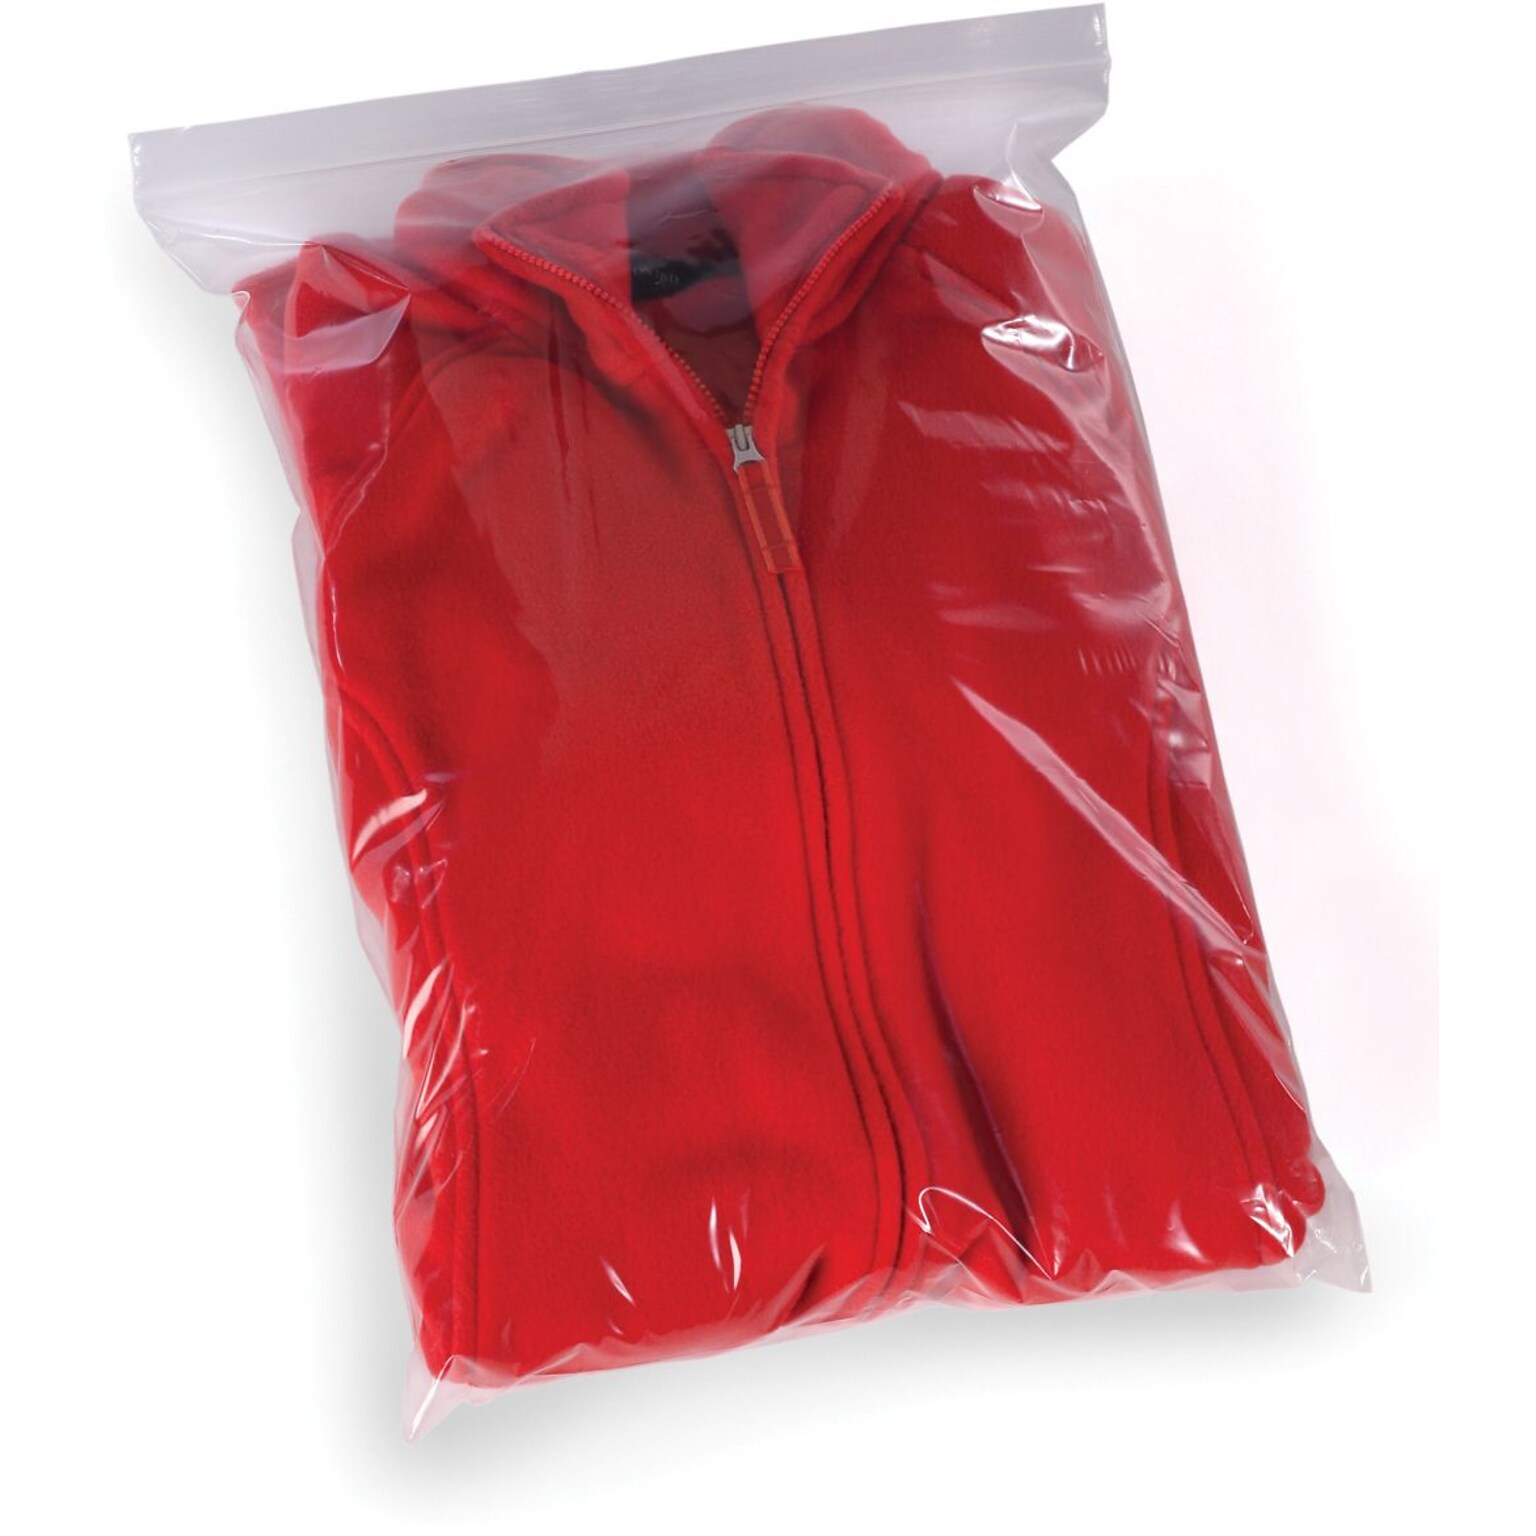 18 x 24 Reclosable Poly Bags, 2 Mil, Clear, 500/Carton (3680A)